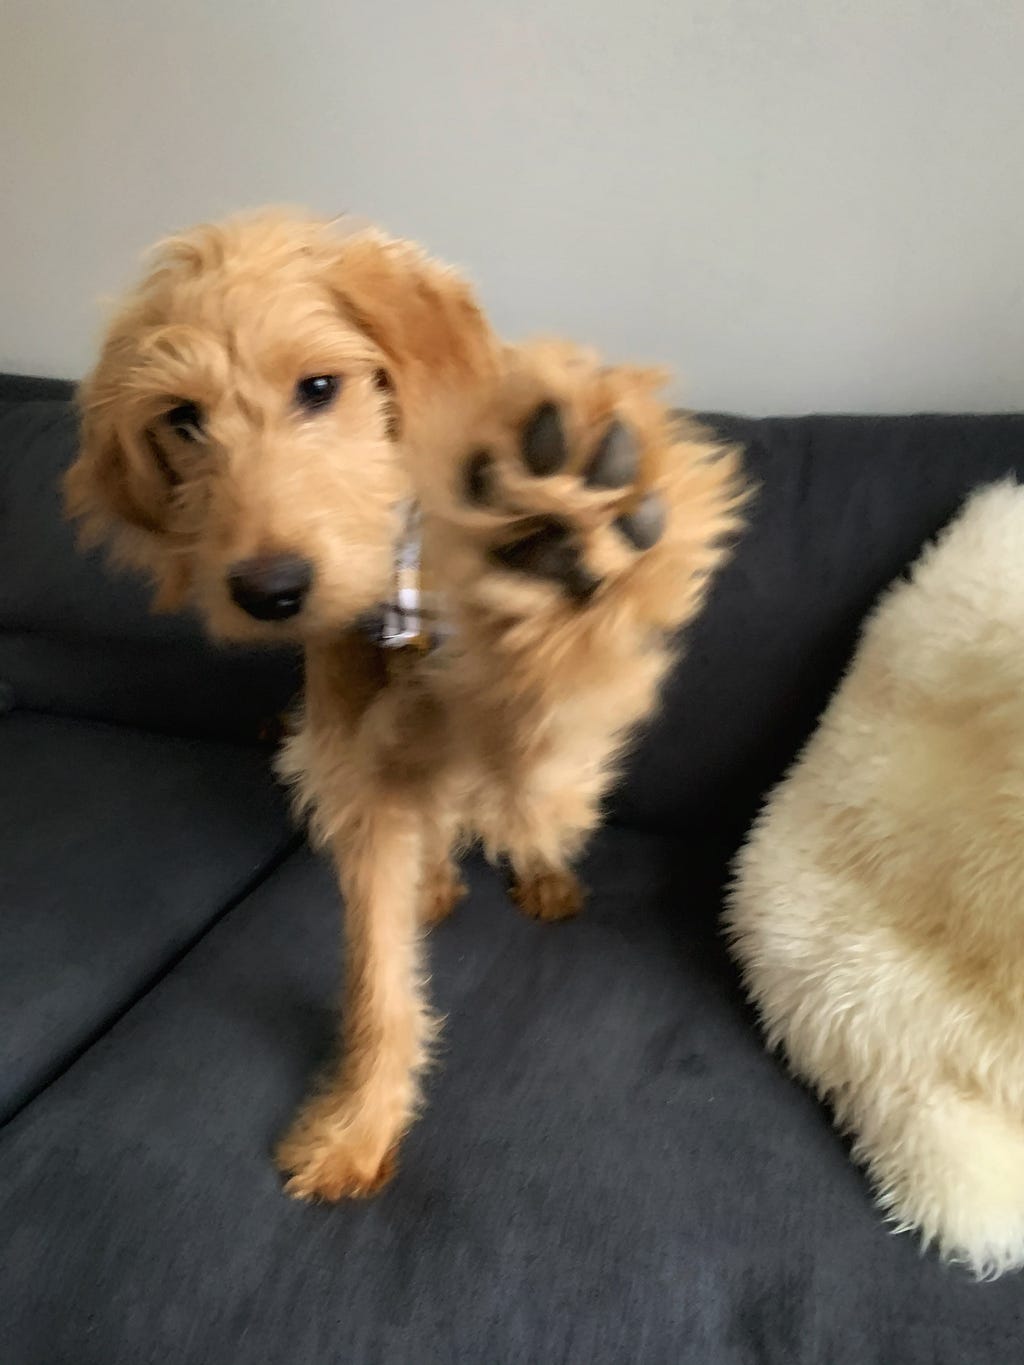 A goldendoodle puppy sitting on a grey sofa with a raised paw, giving a ‘high five’.